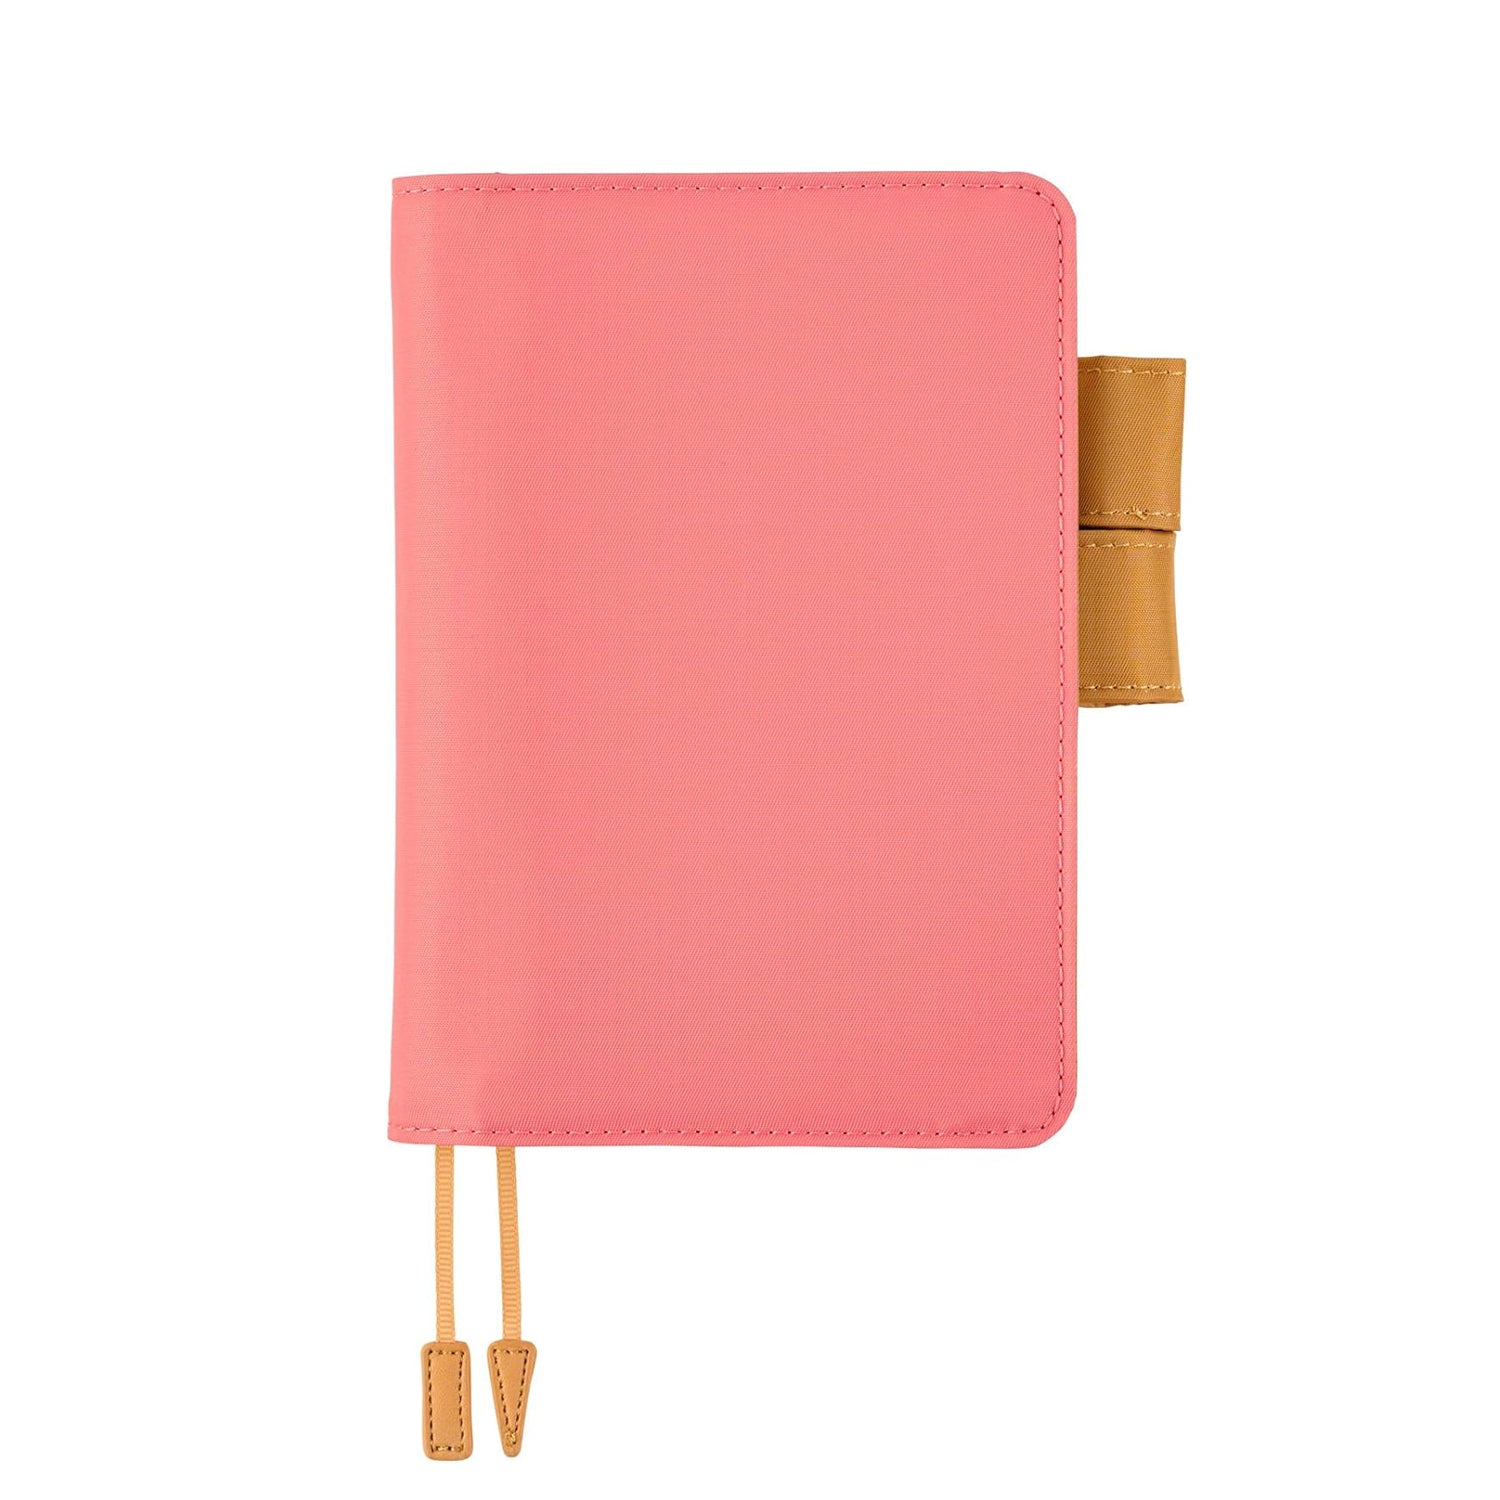 Hobonichi A6 Techo Cover Only - Colors: Dreamy Soda